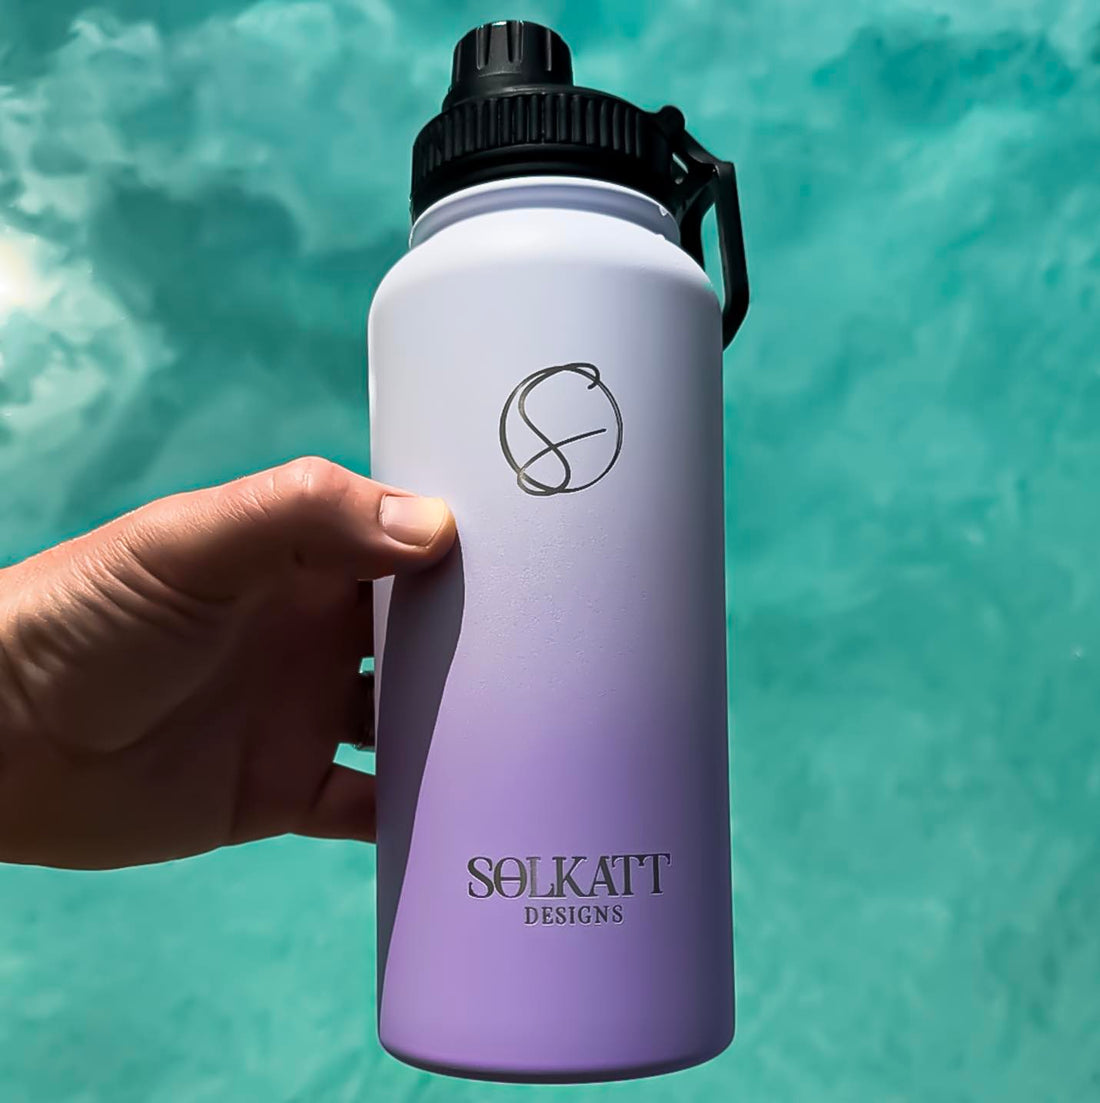 Guide to our Stainless Steel Water Bottles